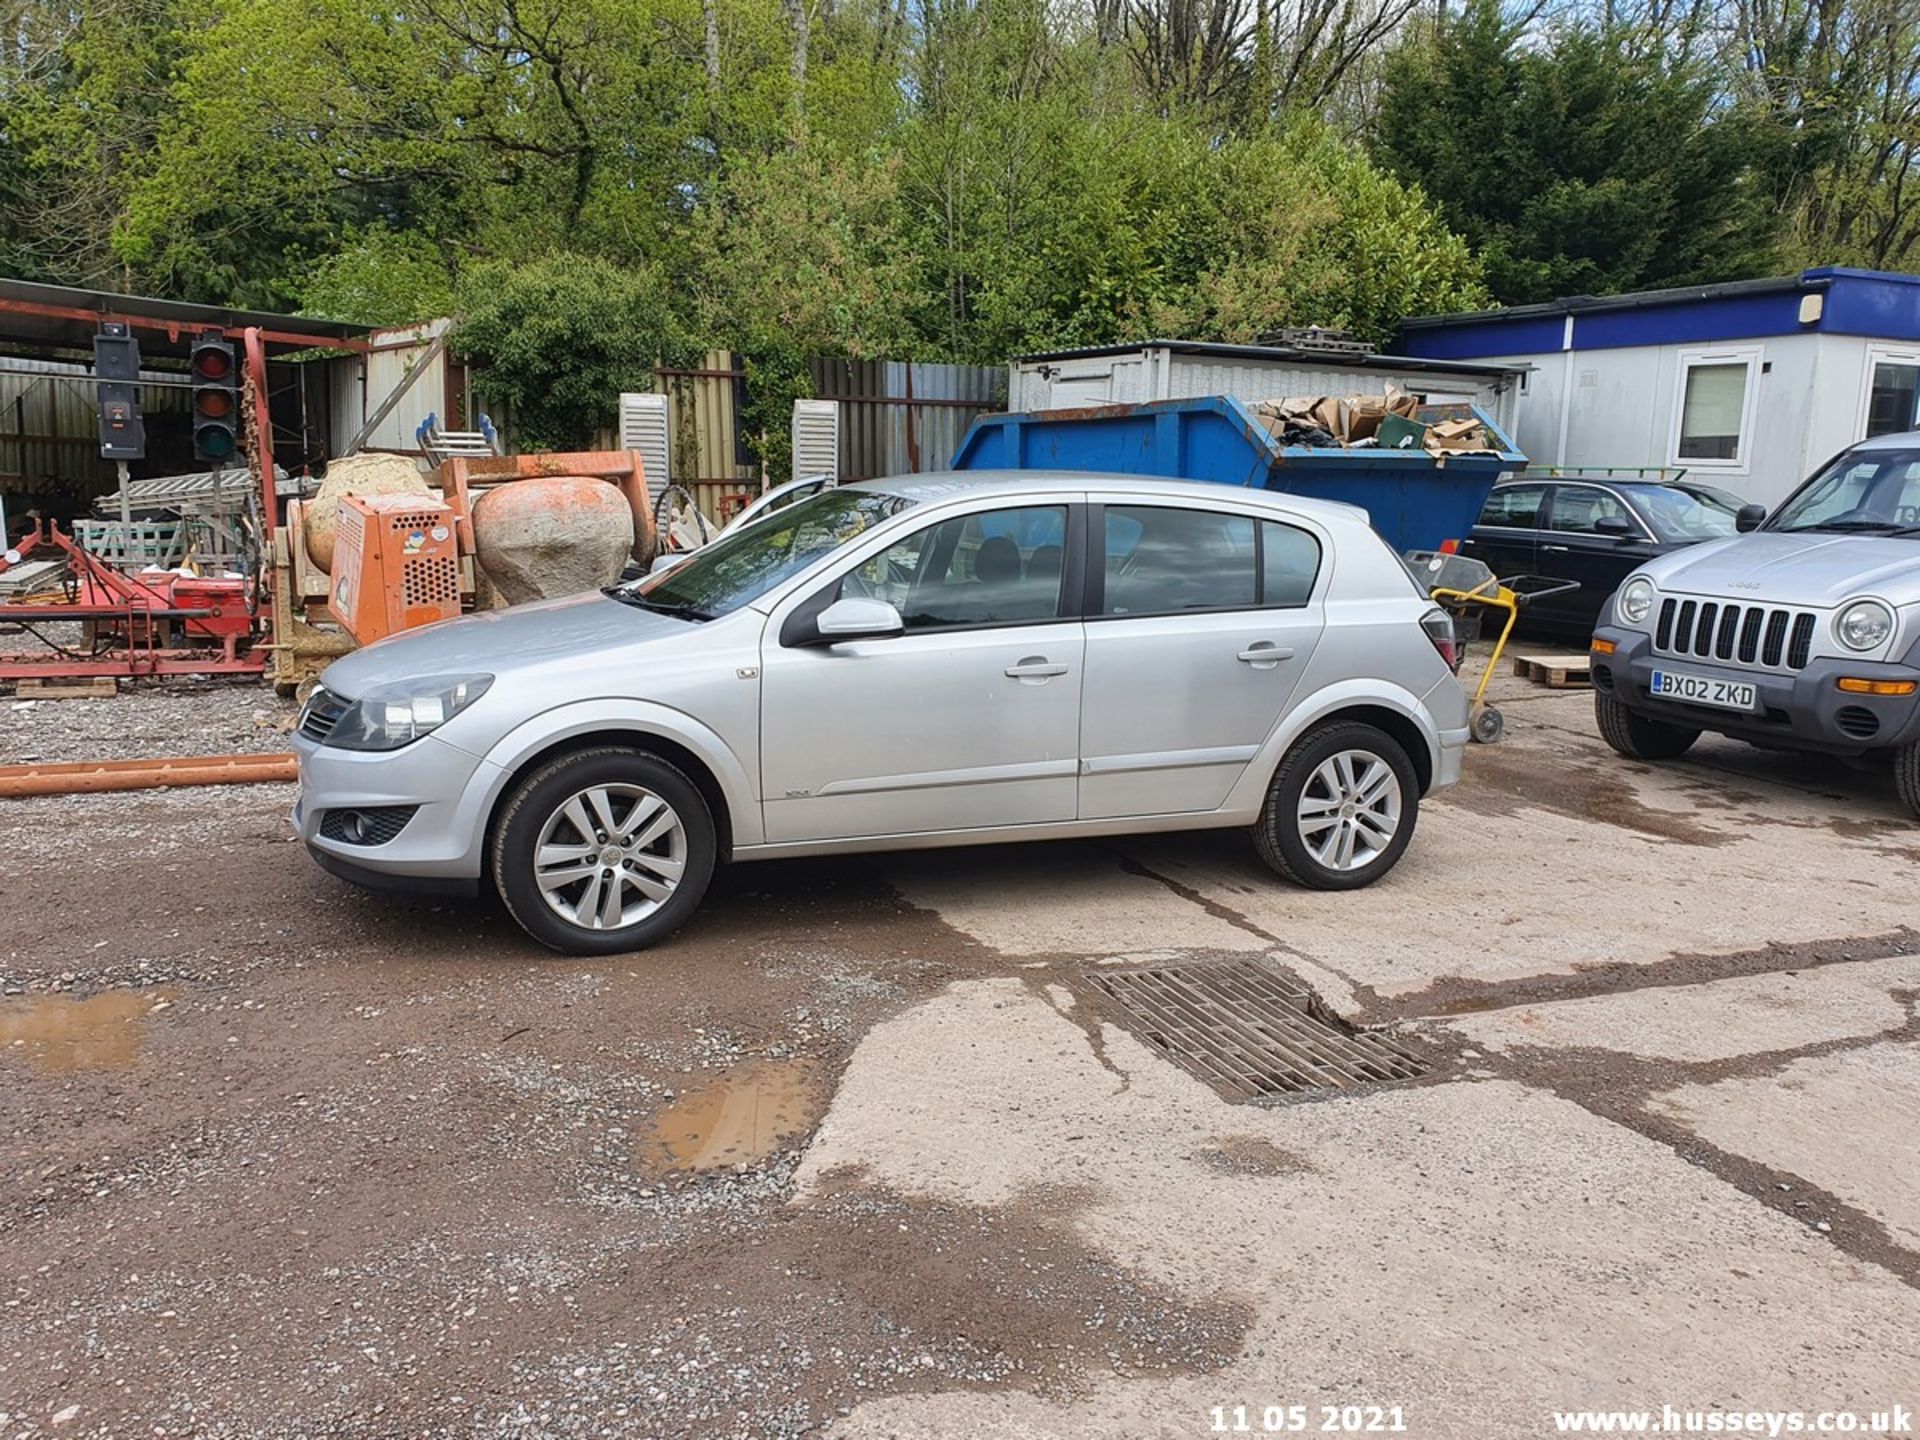 09/09 VAUXHALL ASTRA SXI TWINPORT - 1364cc 5dr Hatchback (Silver, 101k) - Image 5 of 13